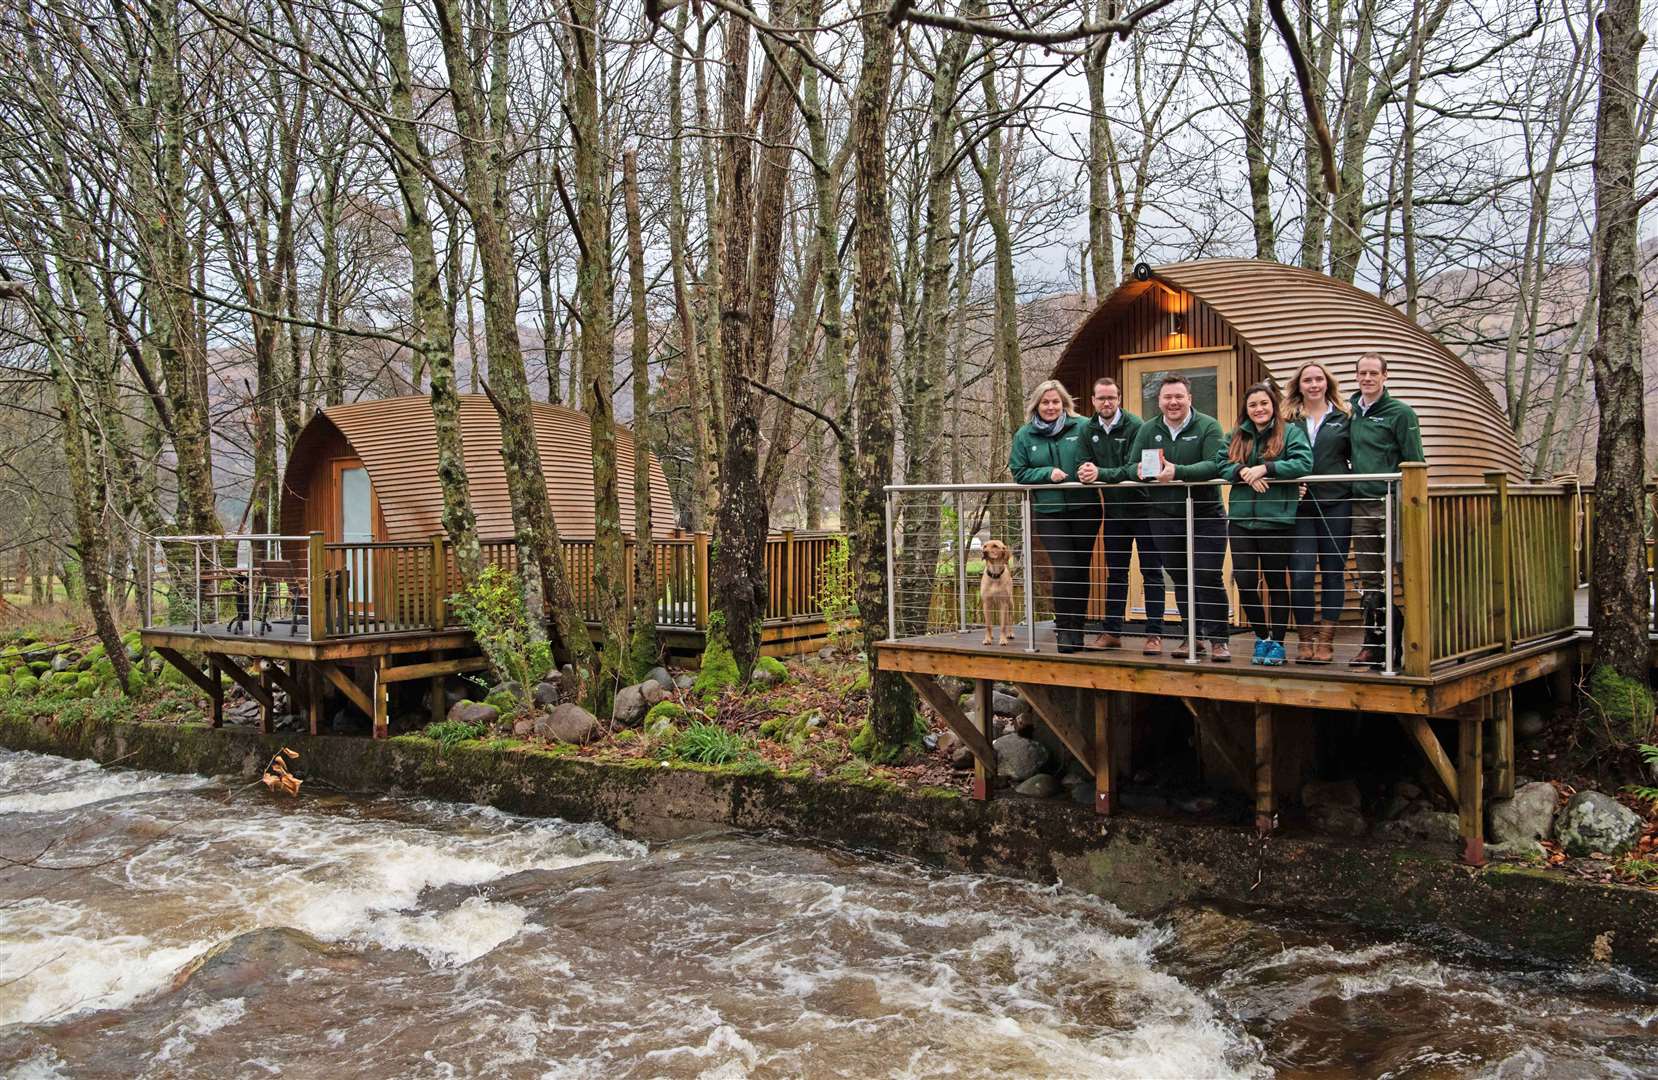 Highland businesses shine every year at the FSB’s UK Celebrating Small Business Awards – the family-run venture Woodlands Glencoe being a great example.